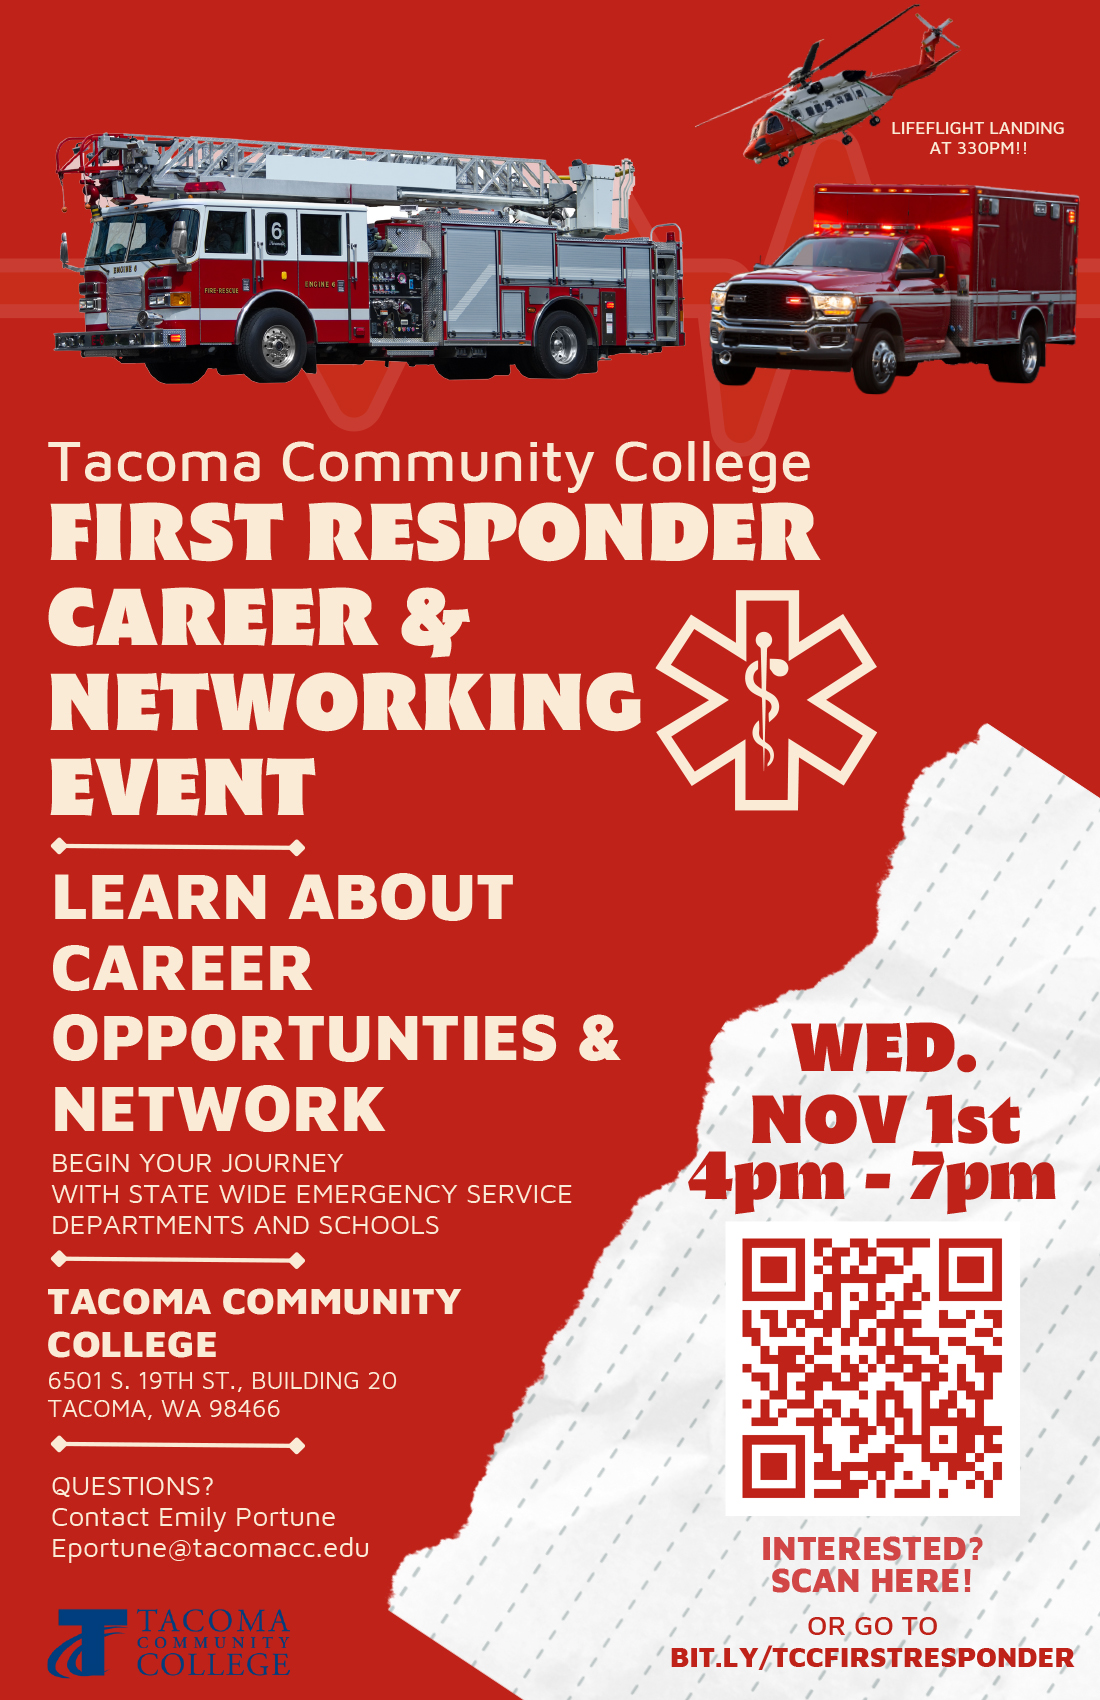 picture of a fire truck. Nov. 1 First Responder Career & Networking Event 